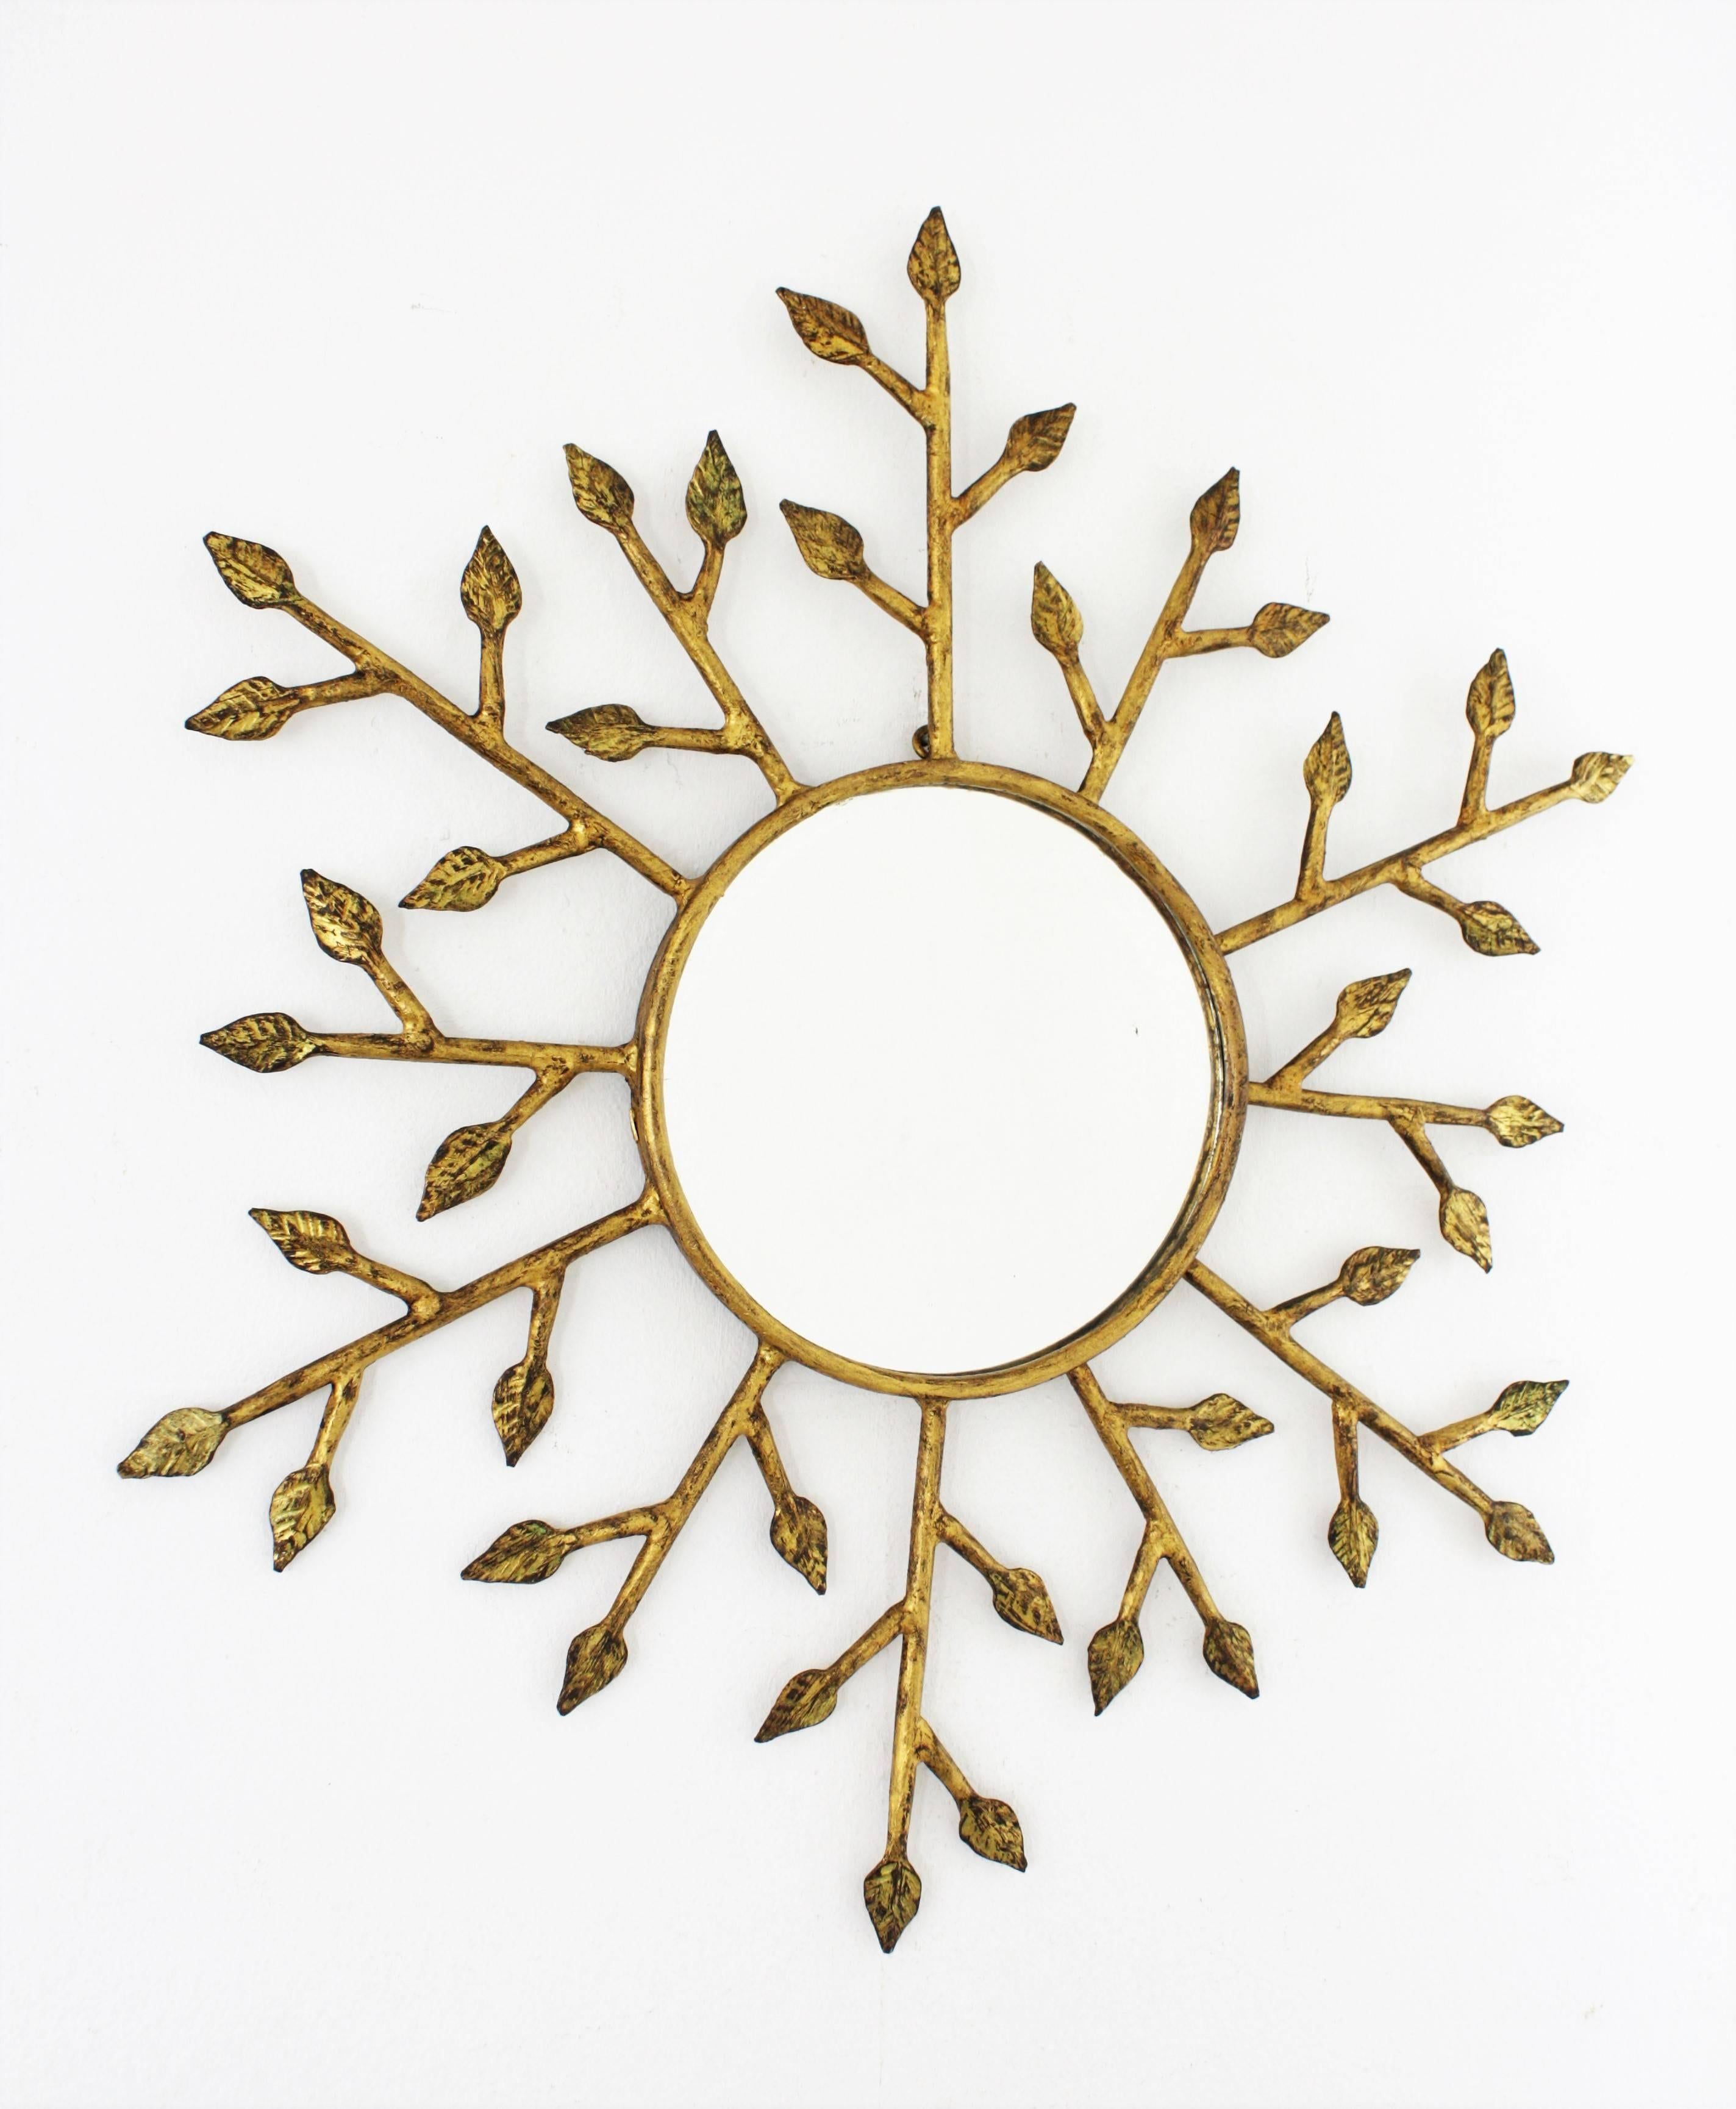 A highly decorative Hollywood Regency hand hammered gold gilt finished frame composed by branches with small leaves surrounding a circular glass, France, 1940-1950s. Glass dimensions: 19cm diameter
Available a huge collection of sunburst mirrors in